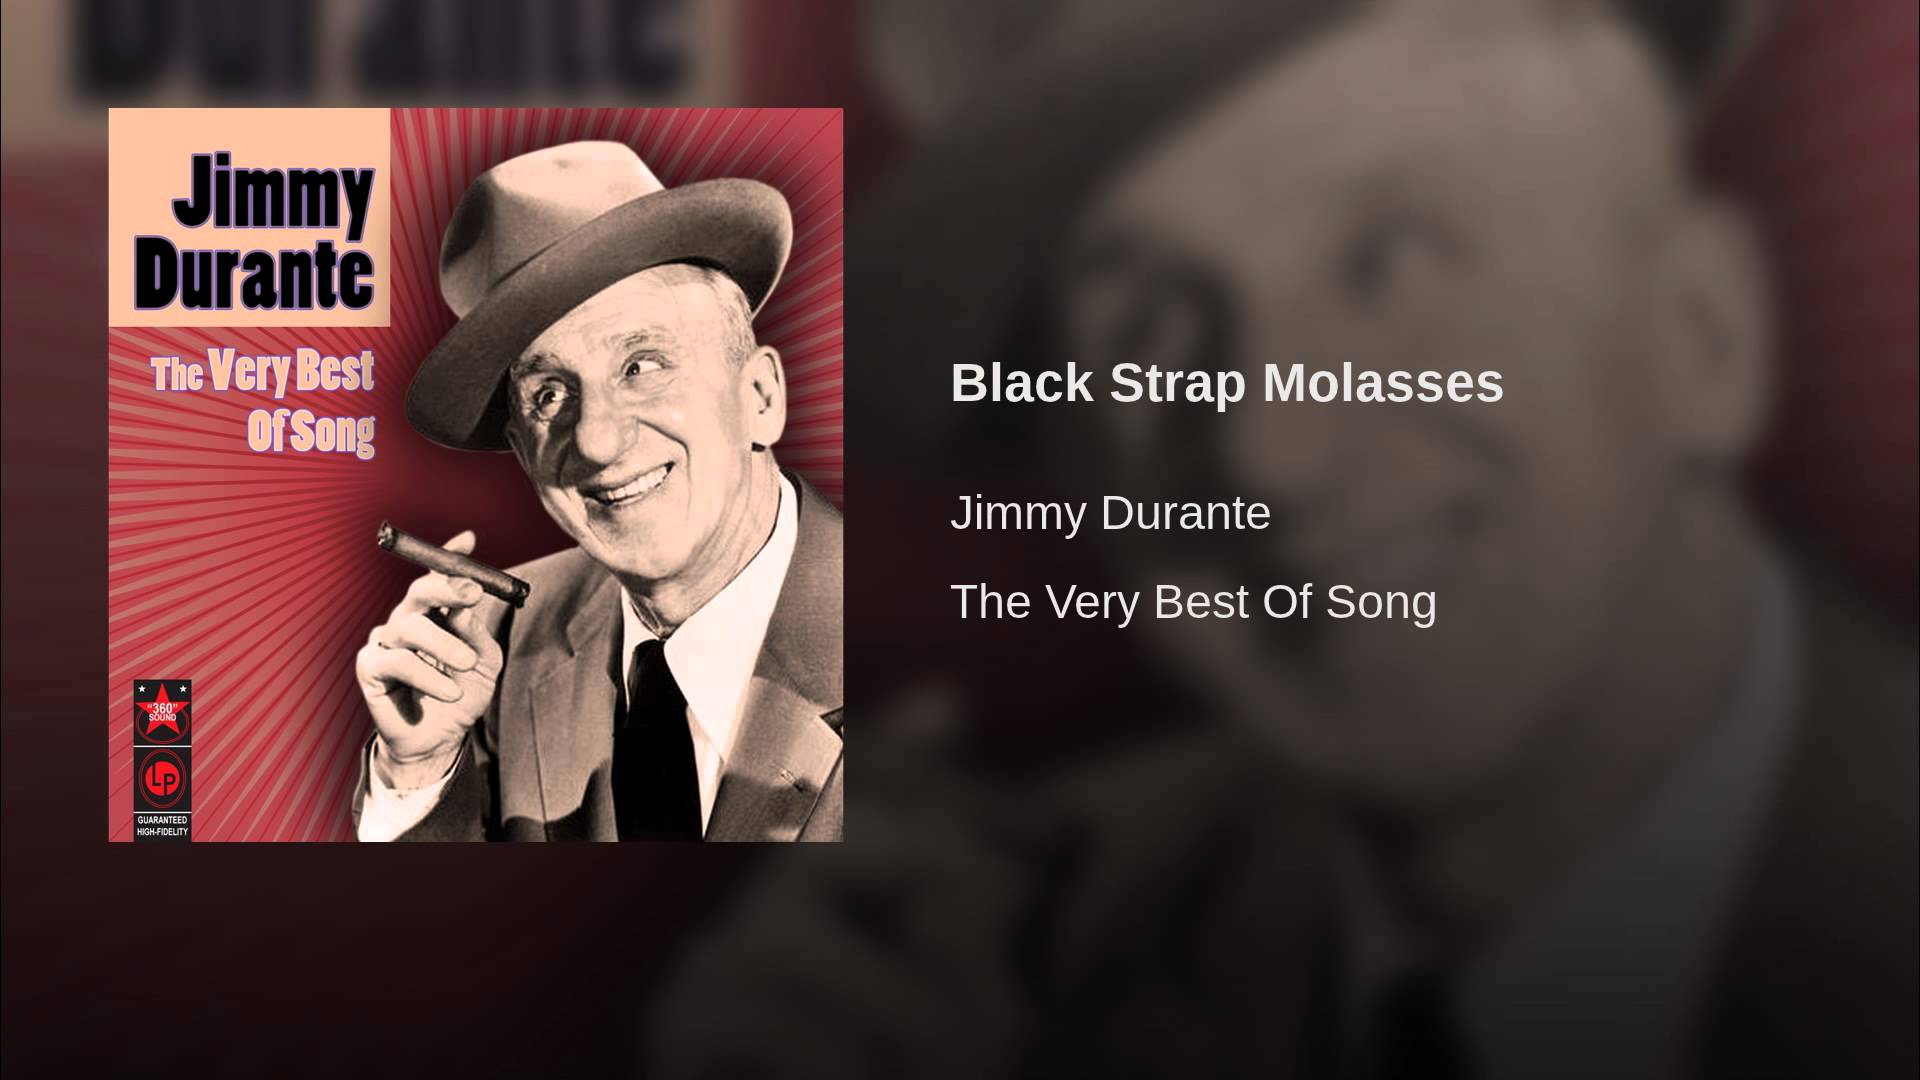 Song lyrics to Black Strap Molasses- performed by Danny Kaye, Groucho Marx, Jimmy Durante, and Jane Wyman